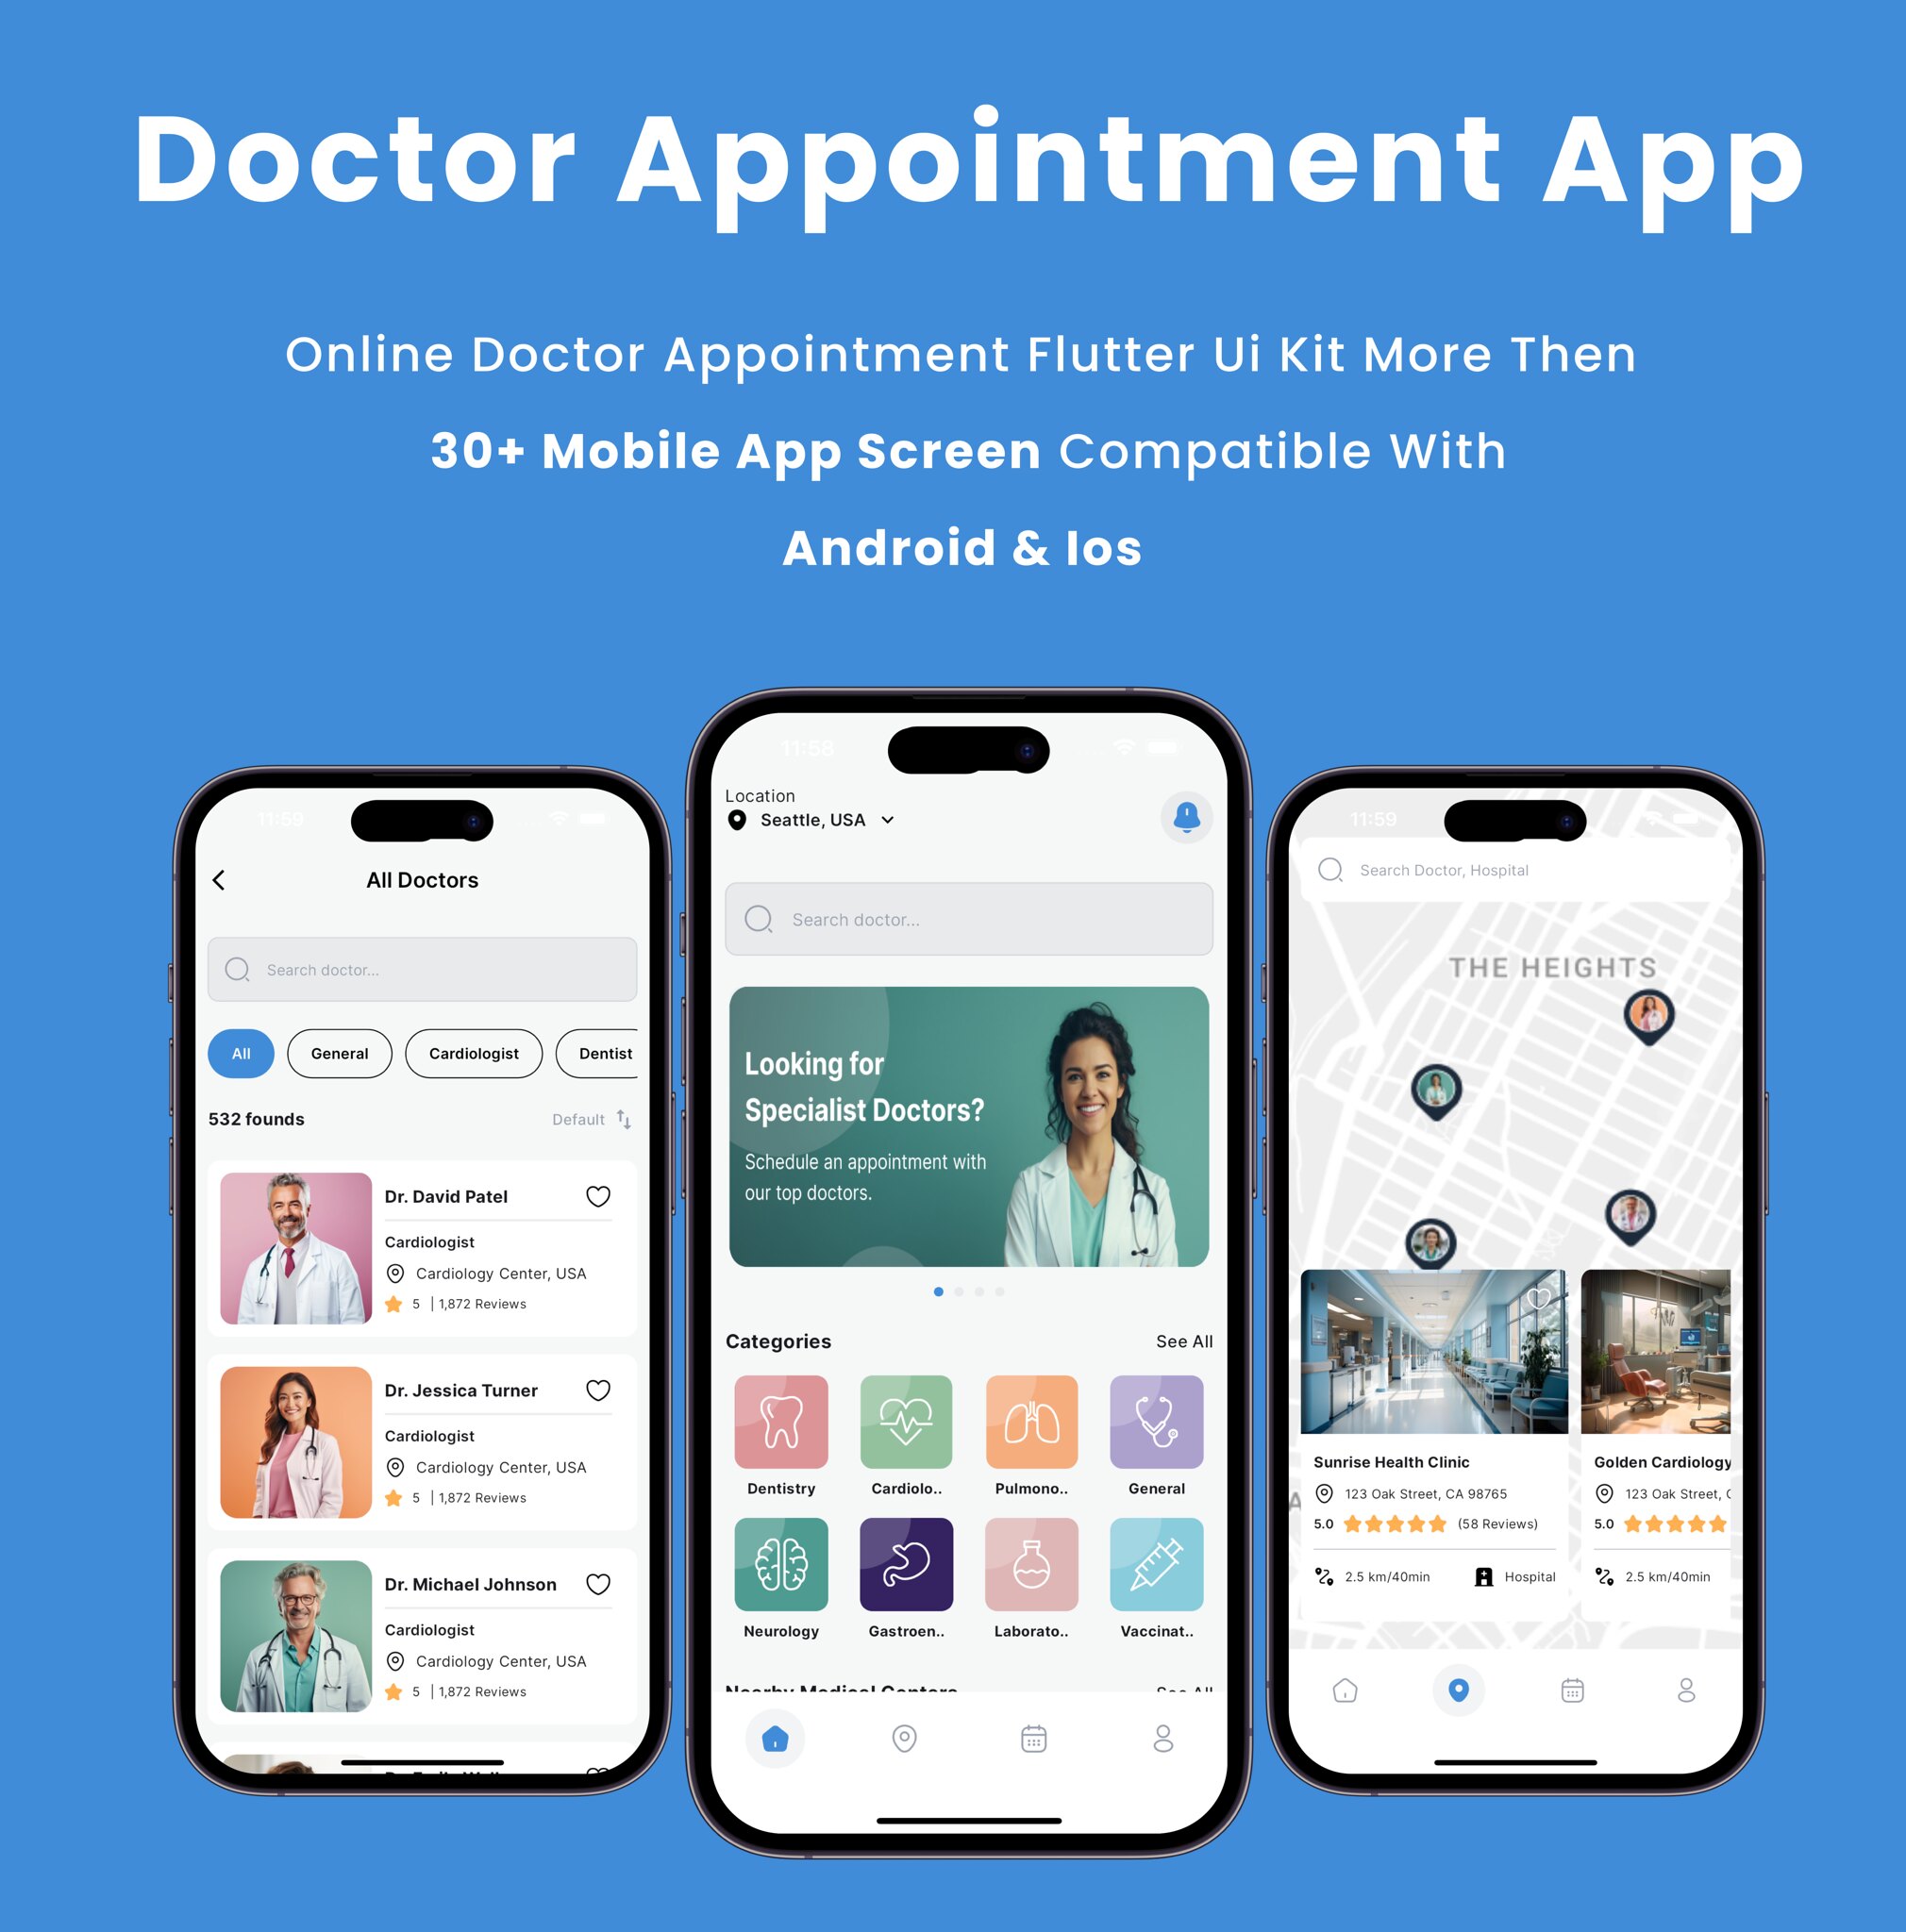 DocAppoint App - Online Doctor Appointment Flutter App | Android | iOS Mobile App Template